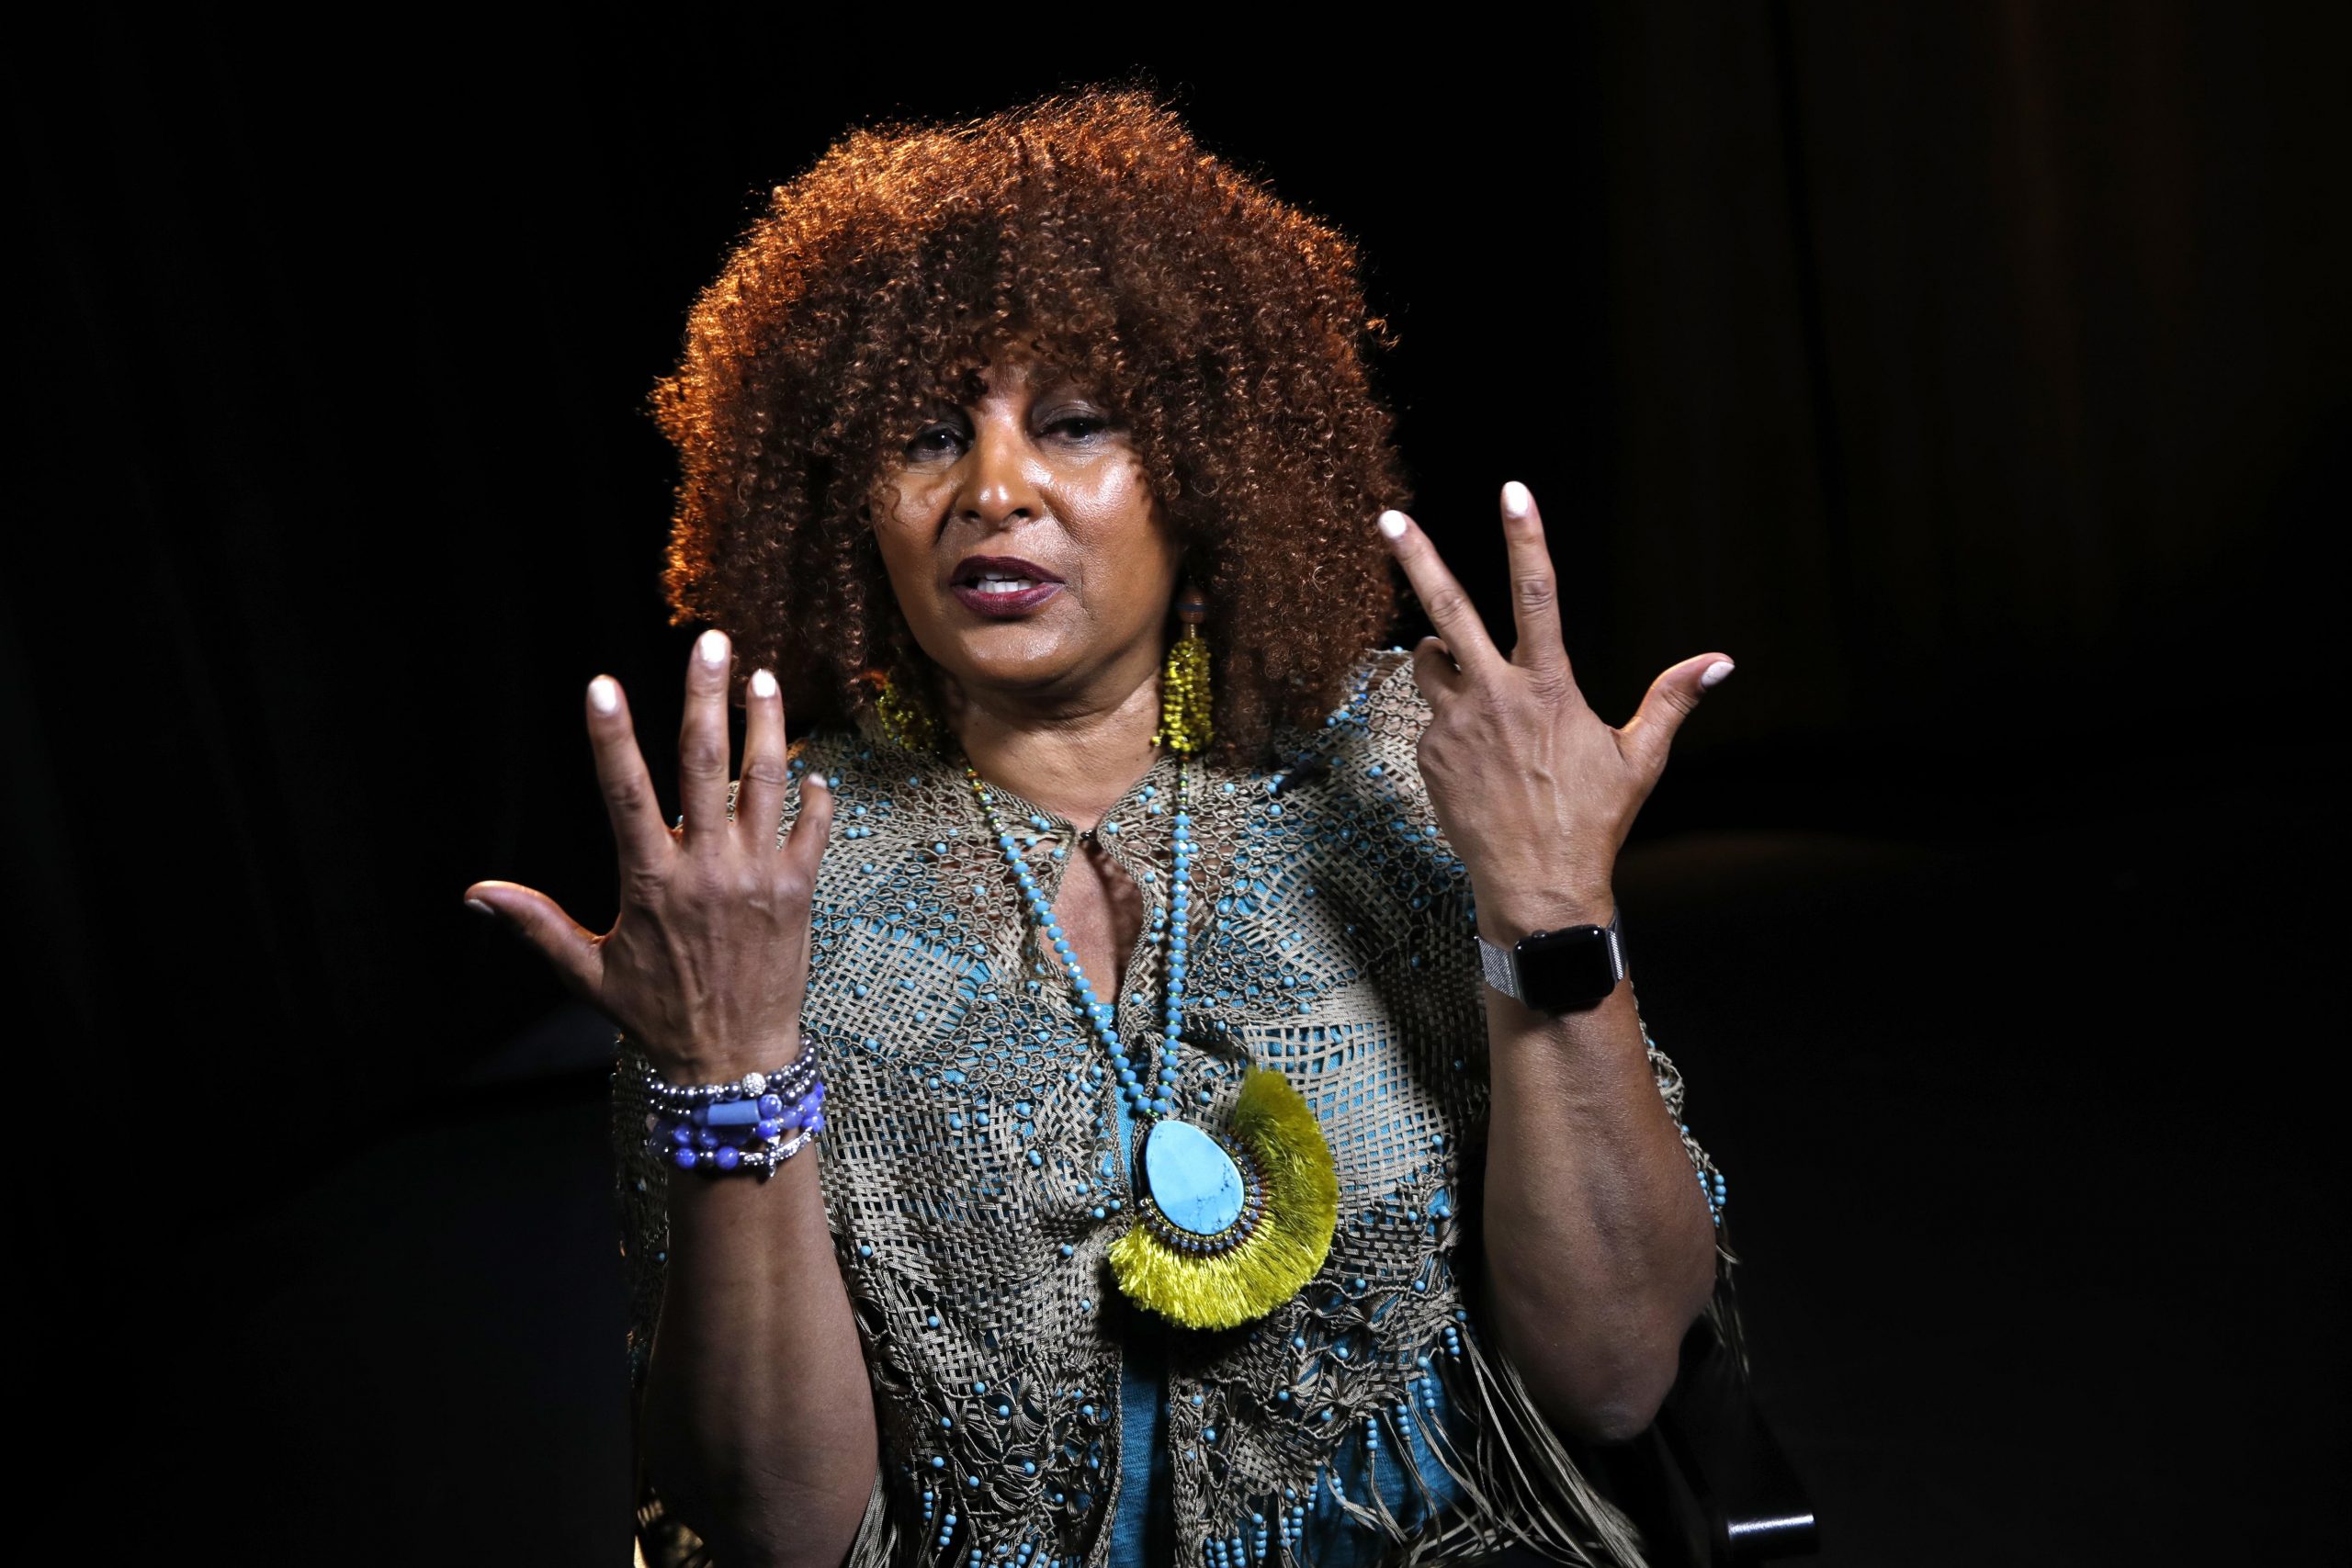 Pam Grier Ethnicity, Race and Nationality. 